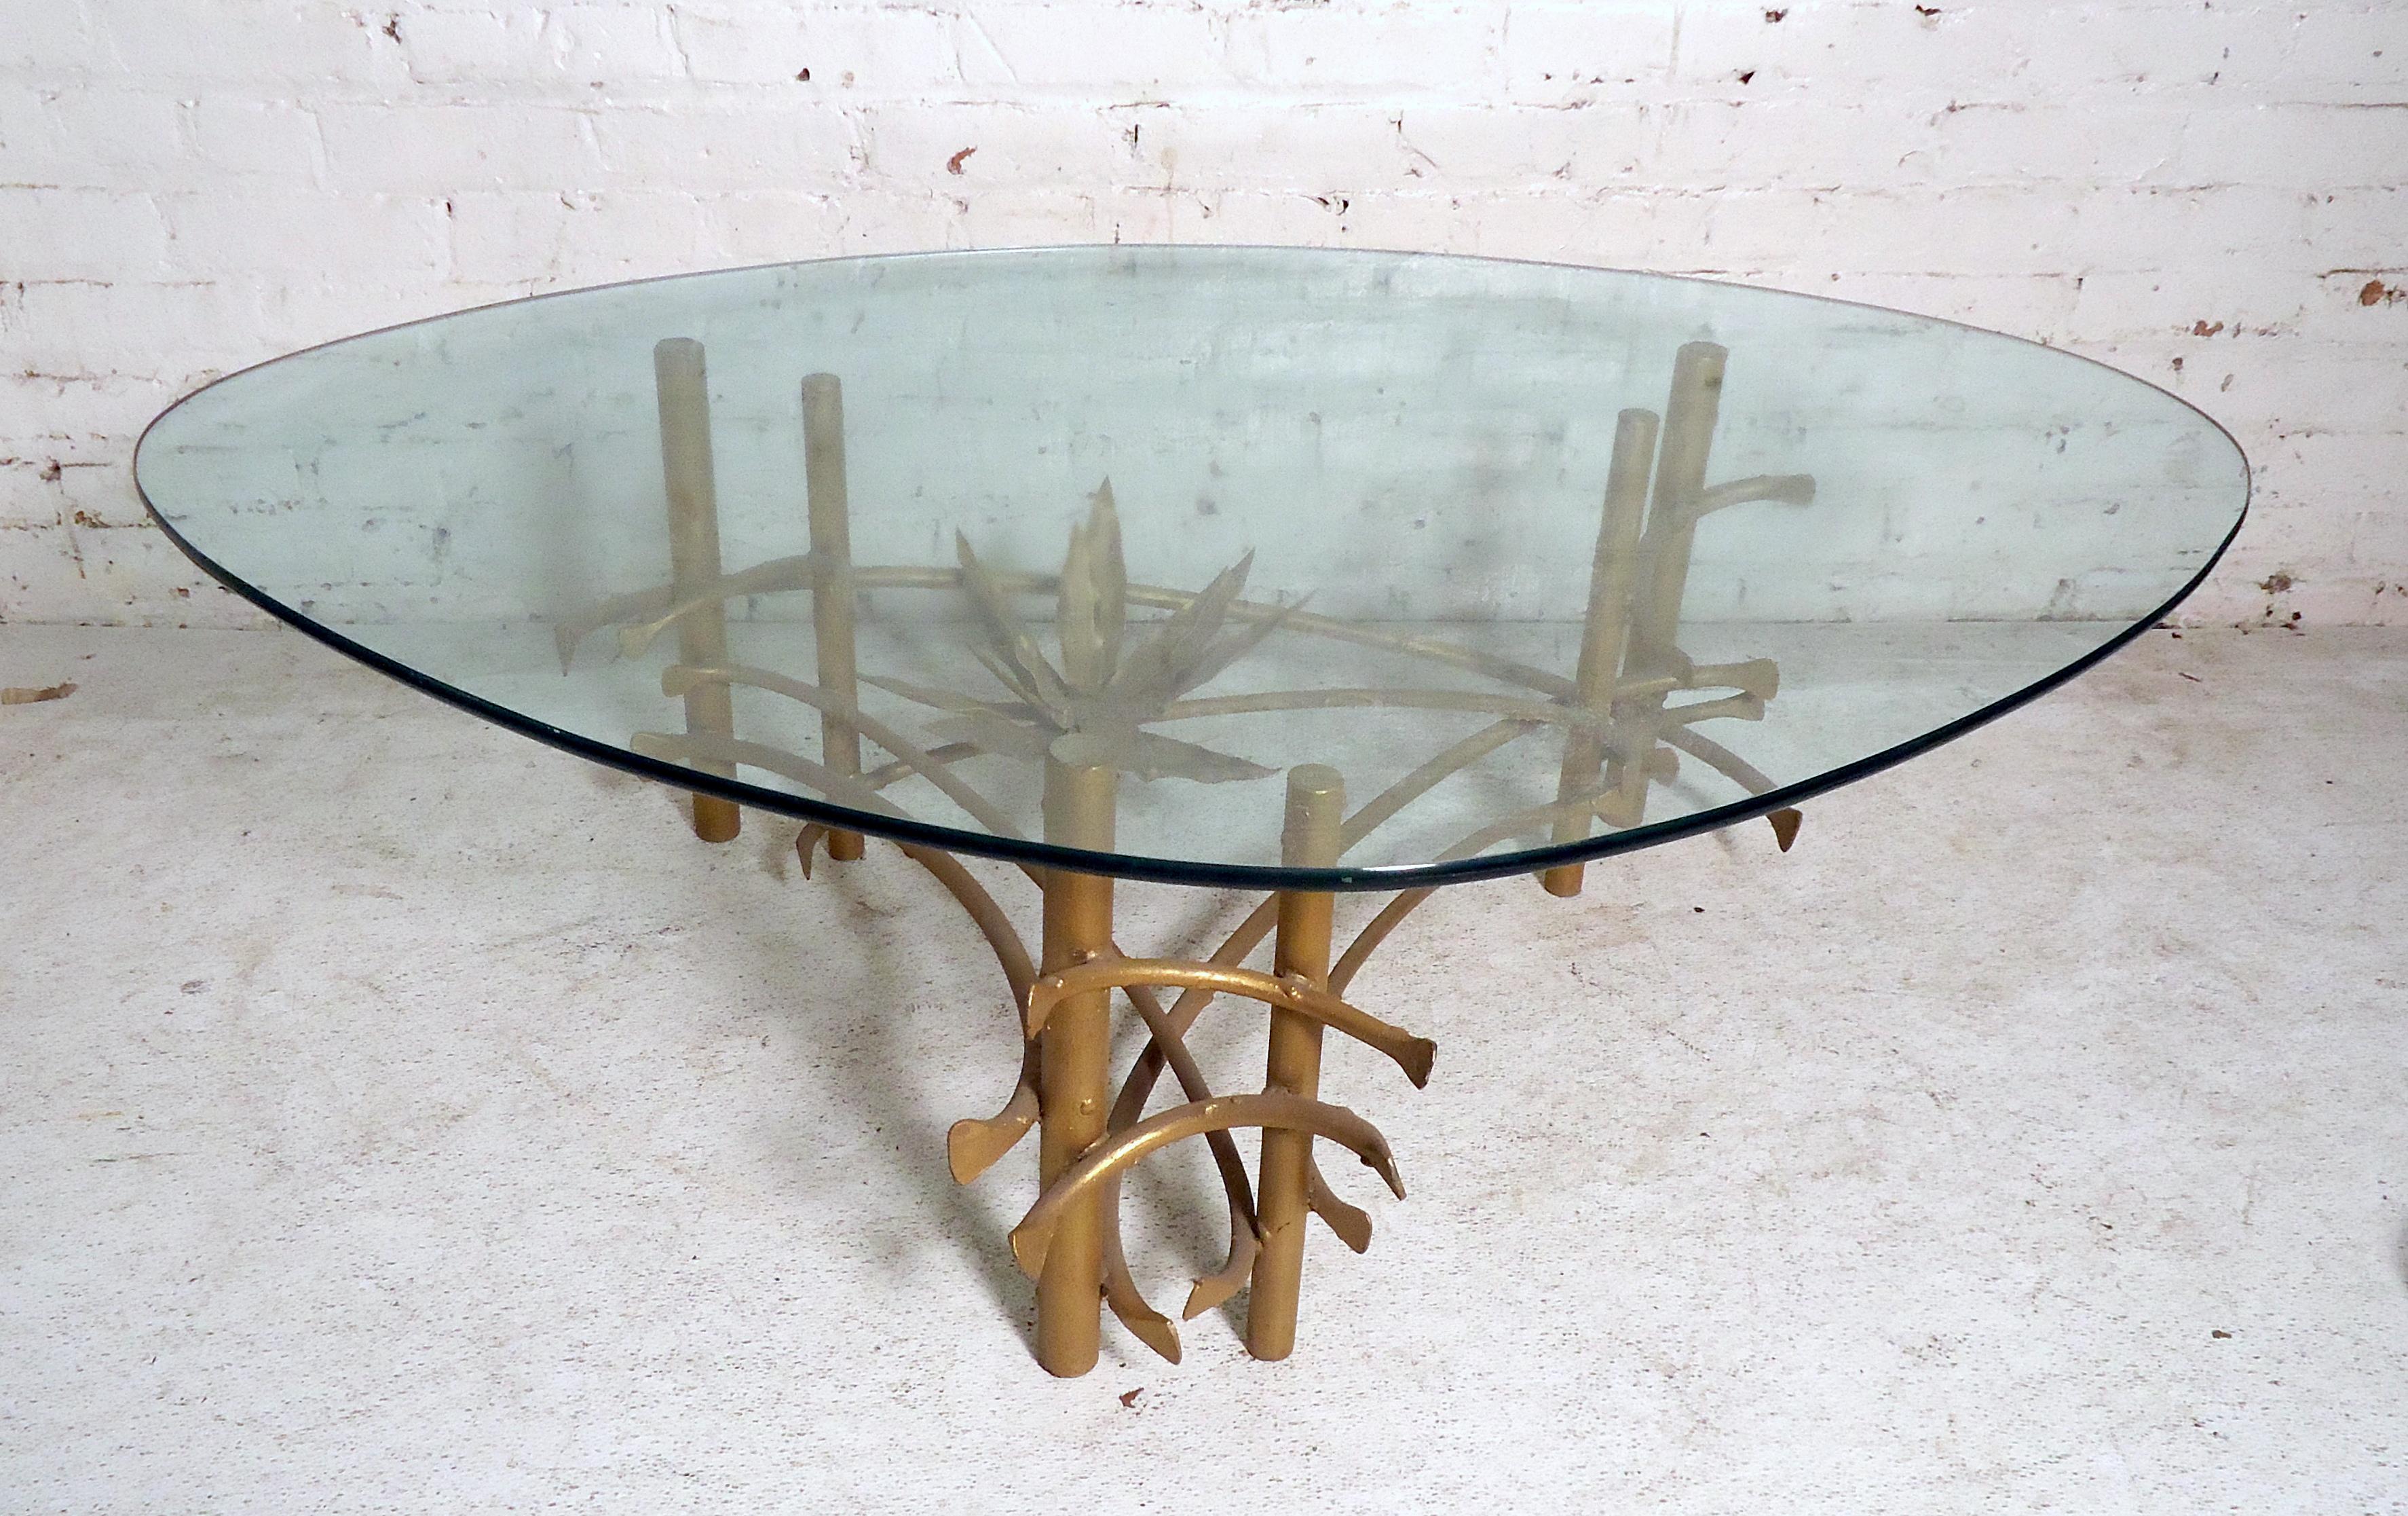 Unique Mid-Century Modern coffee table features a brass coated base, triangle glass with rounded edges.

Please confirm item location NY or NJ with dealer.